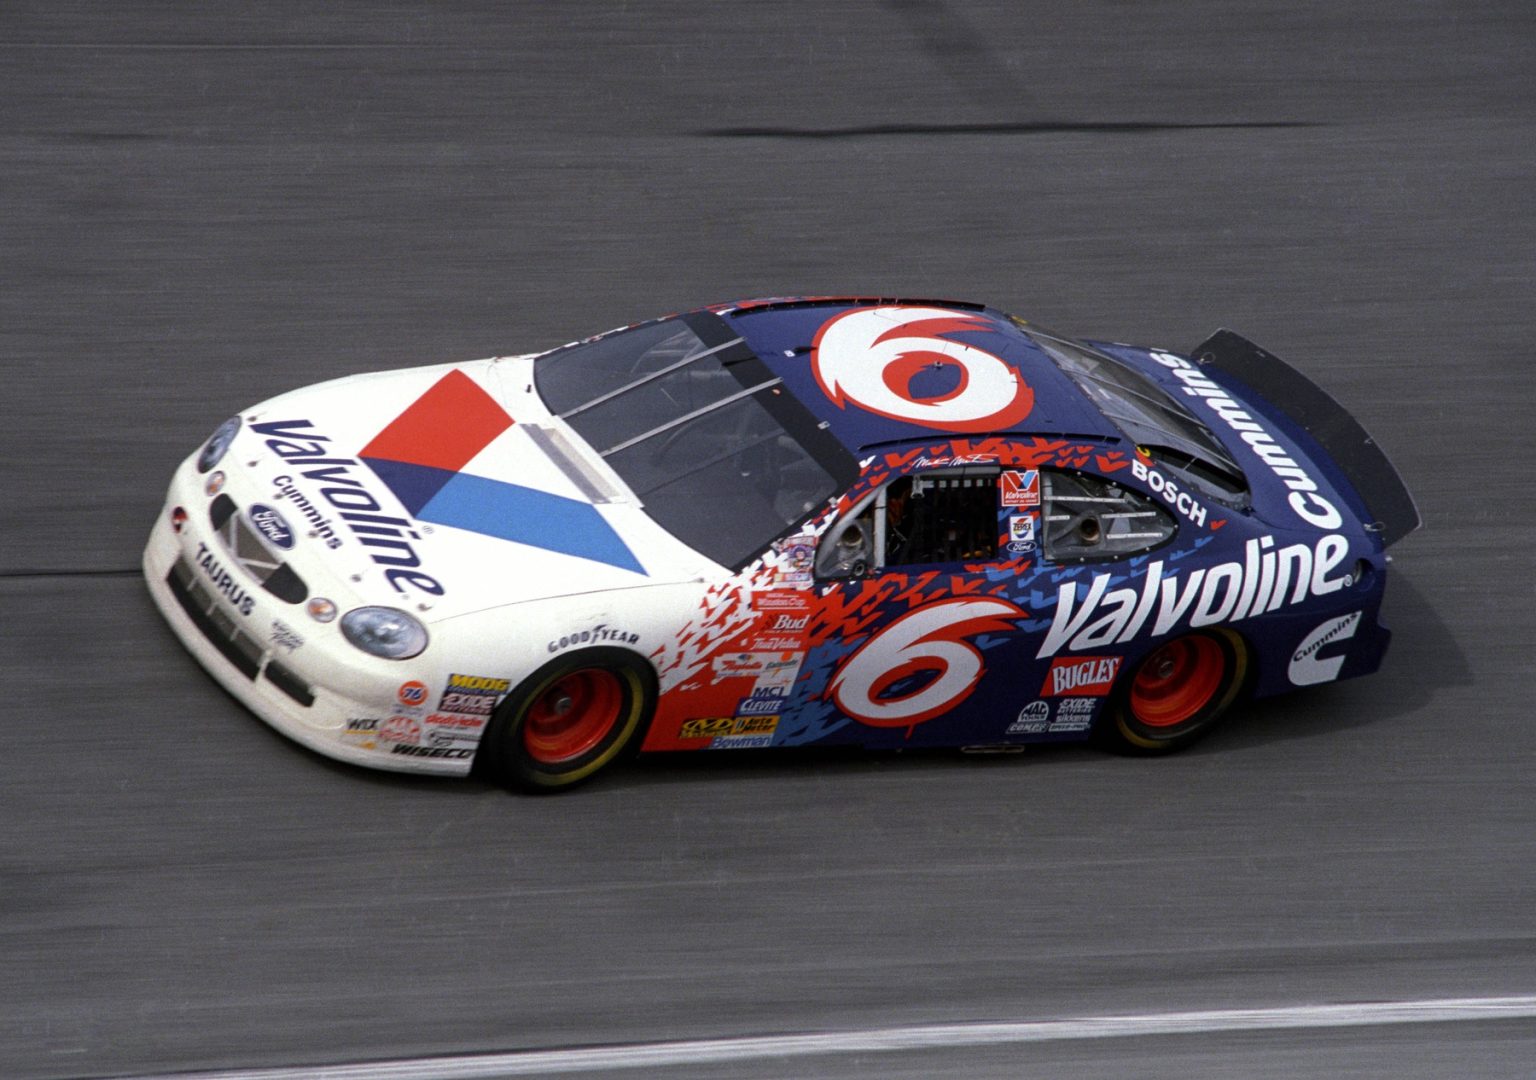 The Most Iconic Sponsors in NASCAR History Part. 2